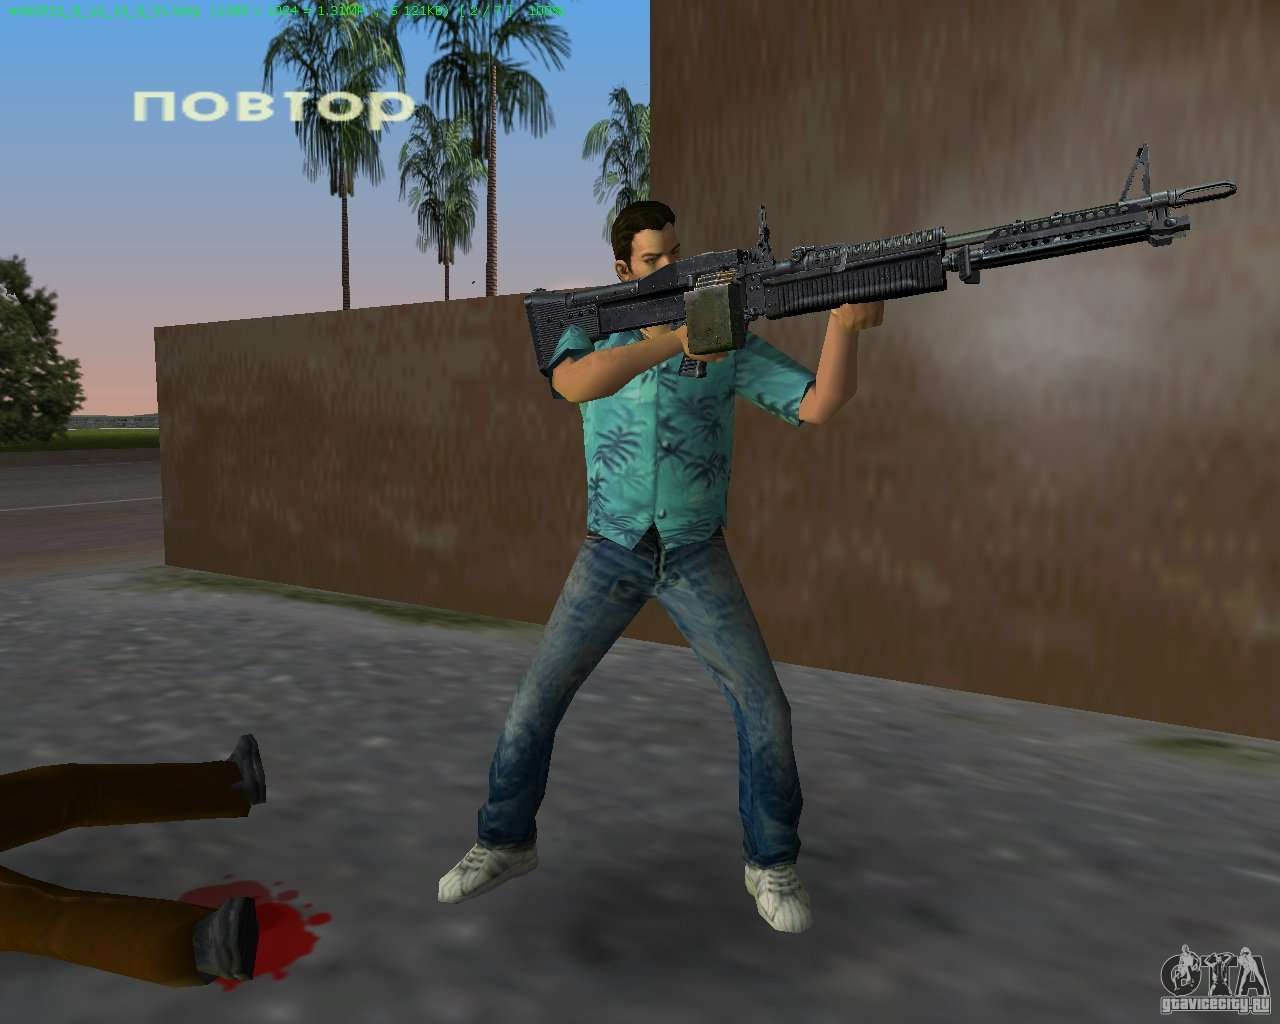 Gta vice city download for windows 7